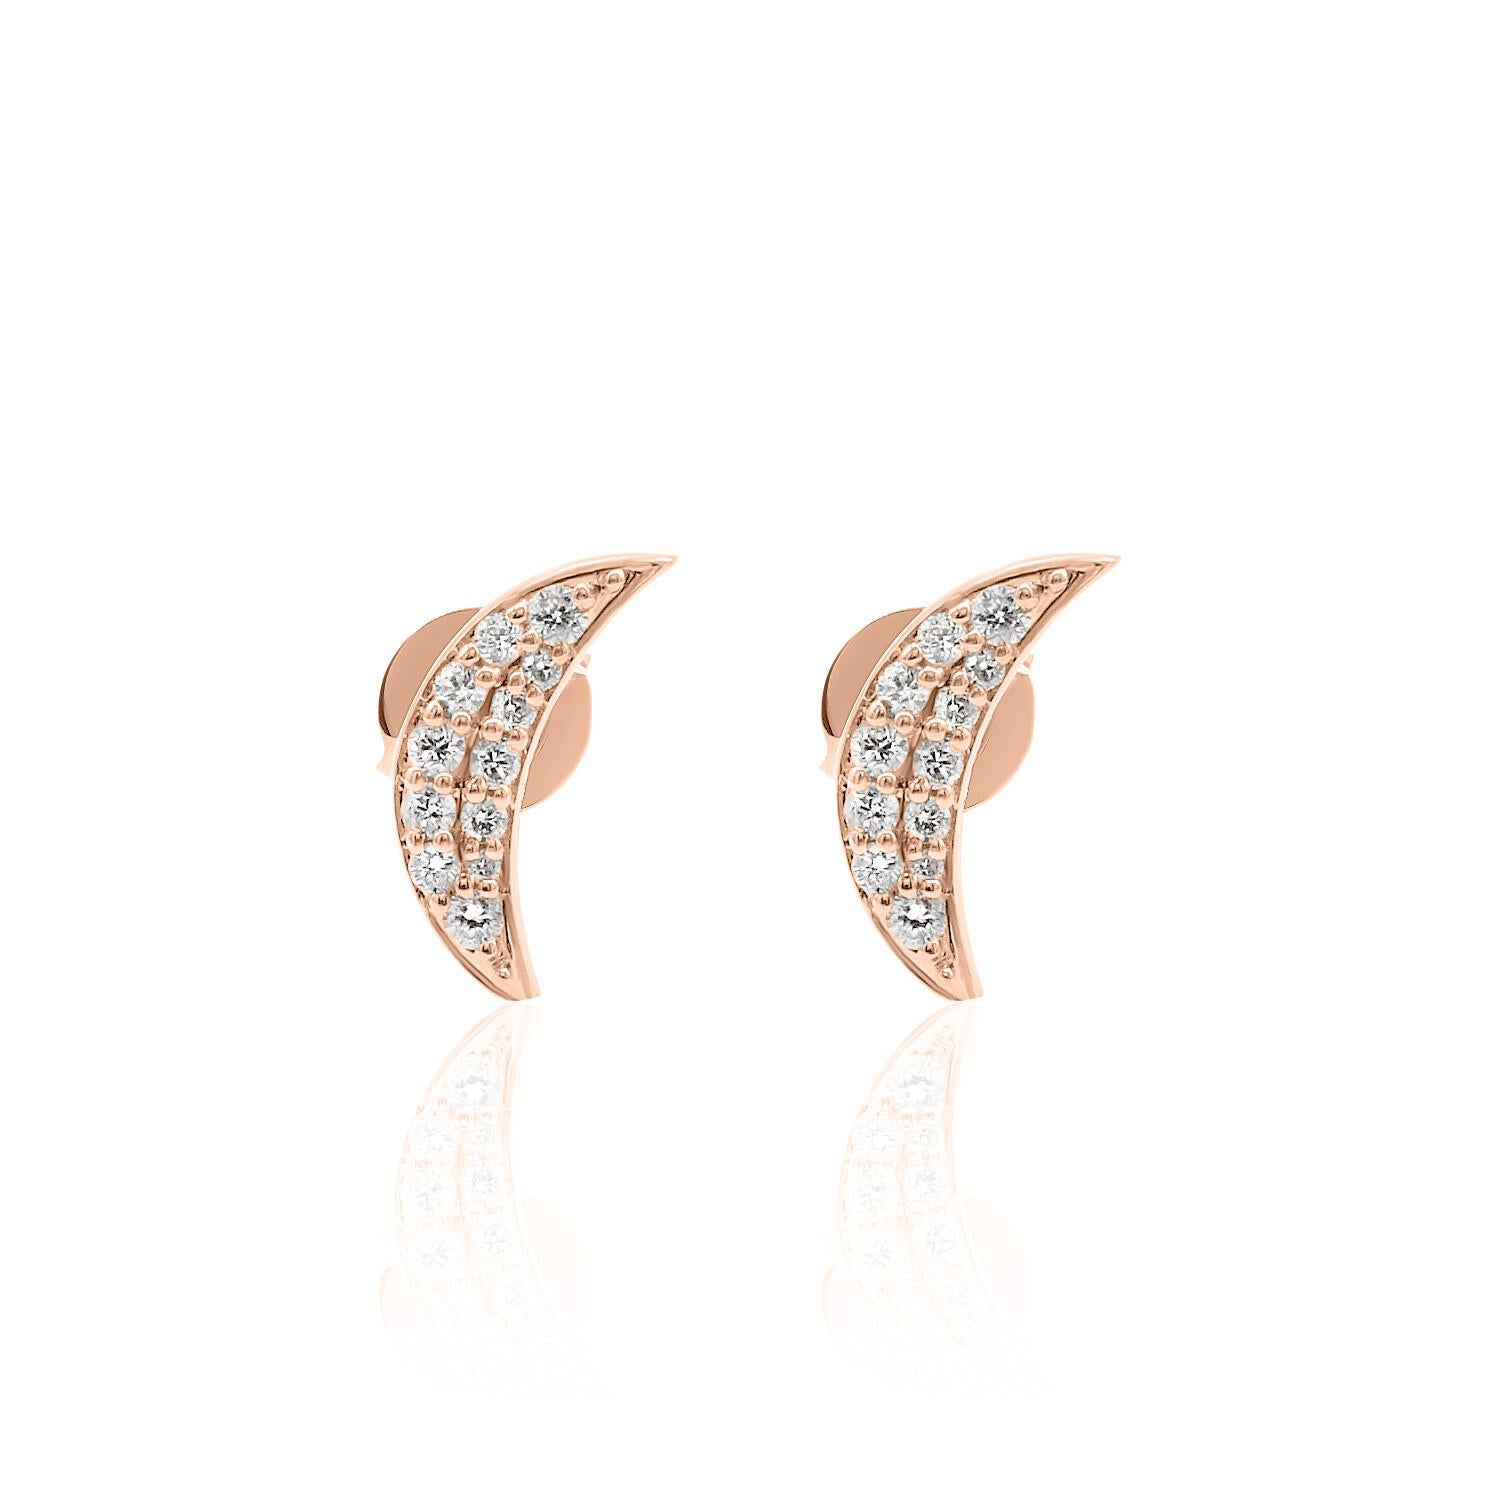 Round Cut Moon Shaped Diamond Earrings 14K, White, Yellow, and Rose Gold